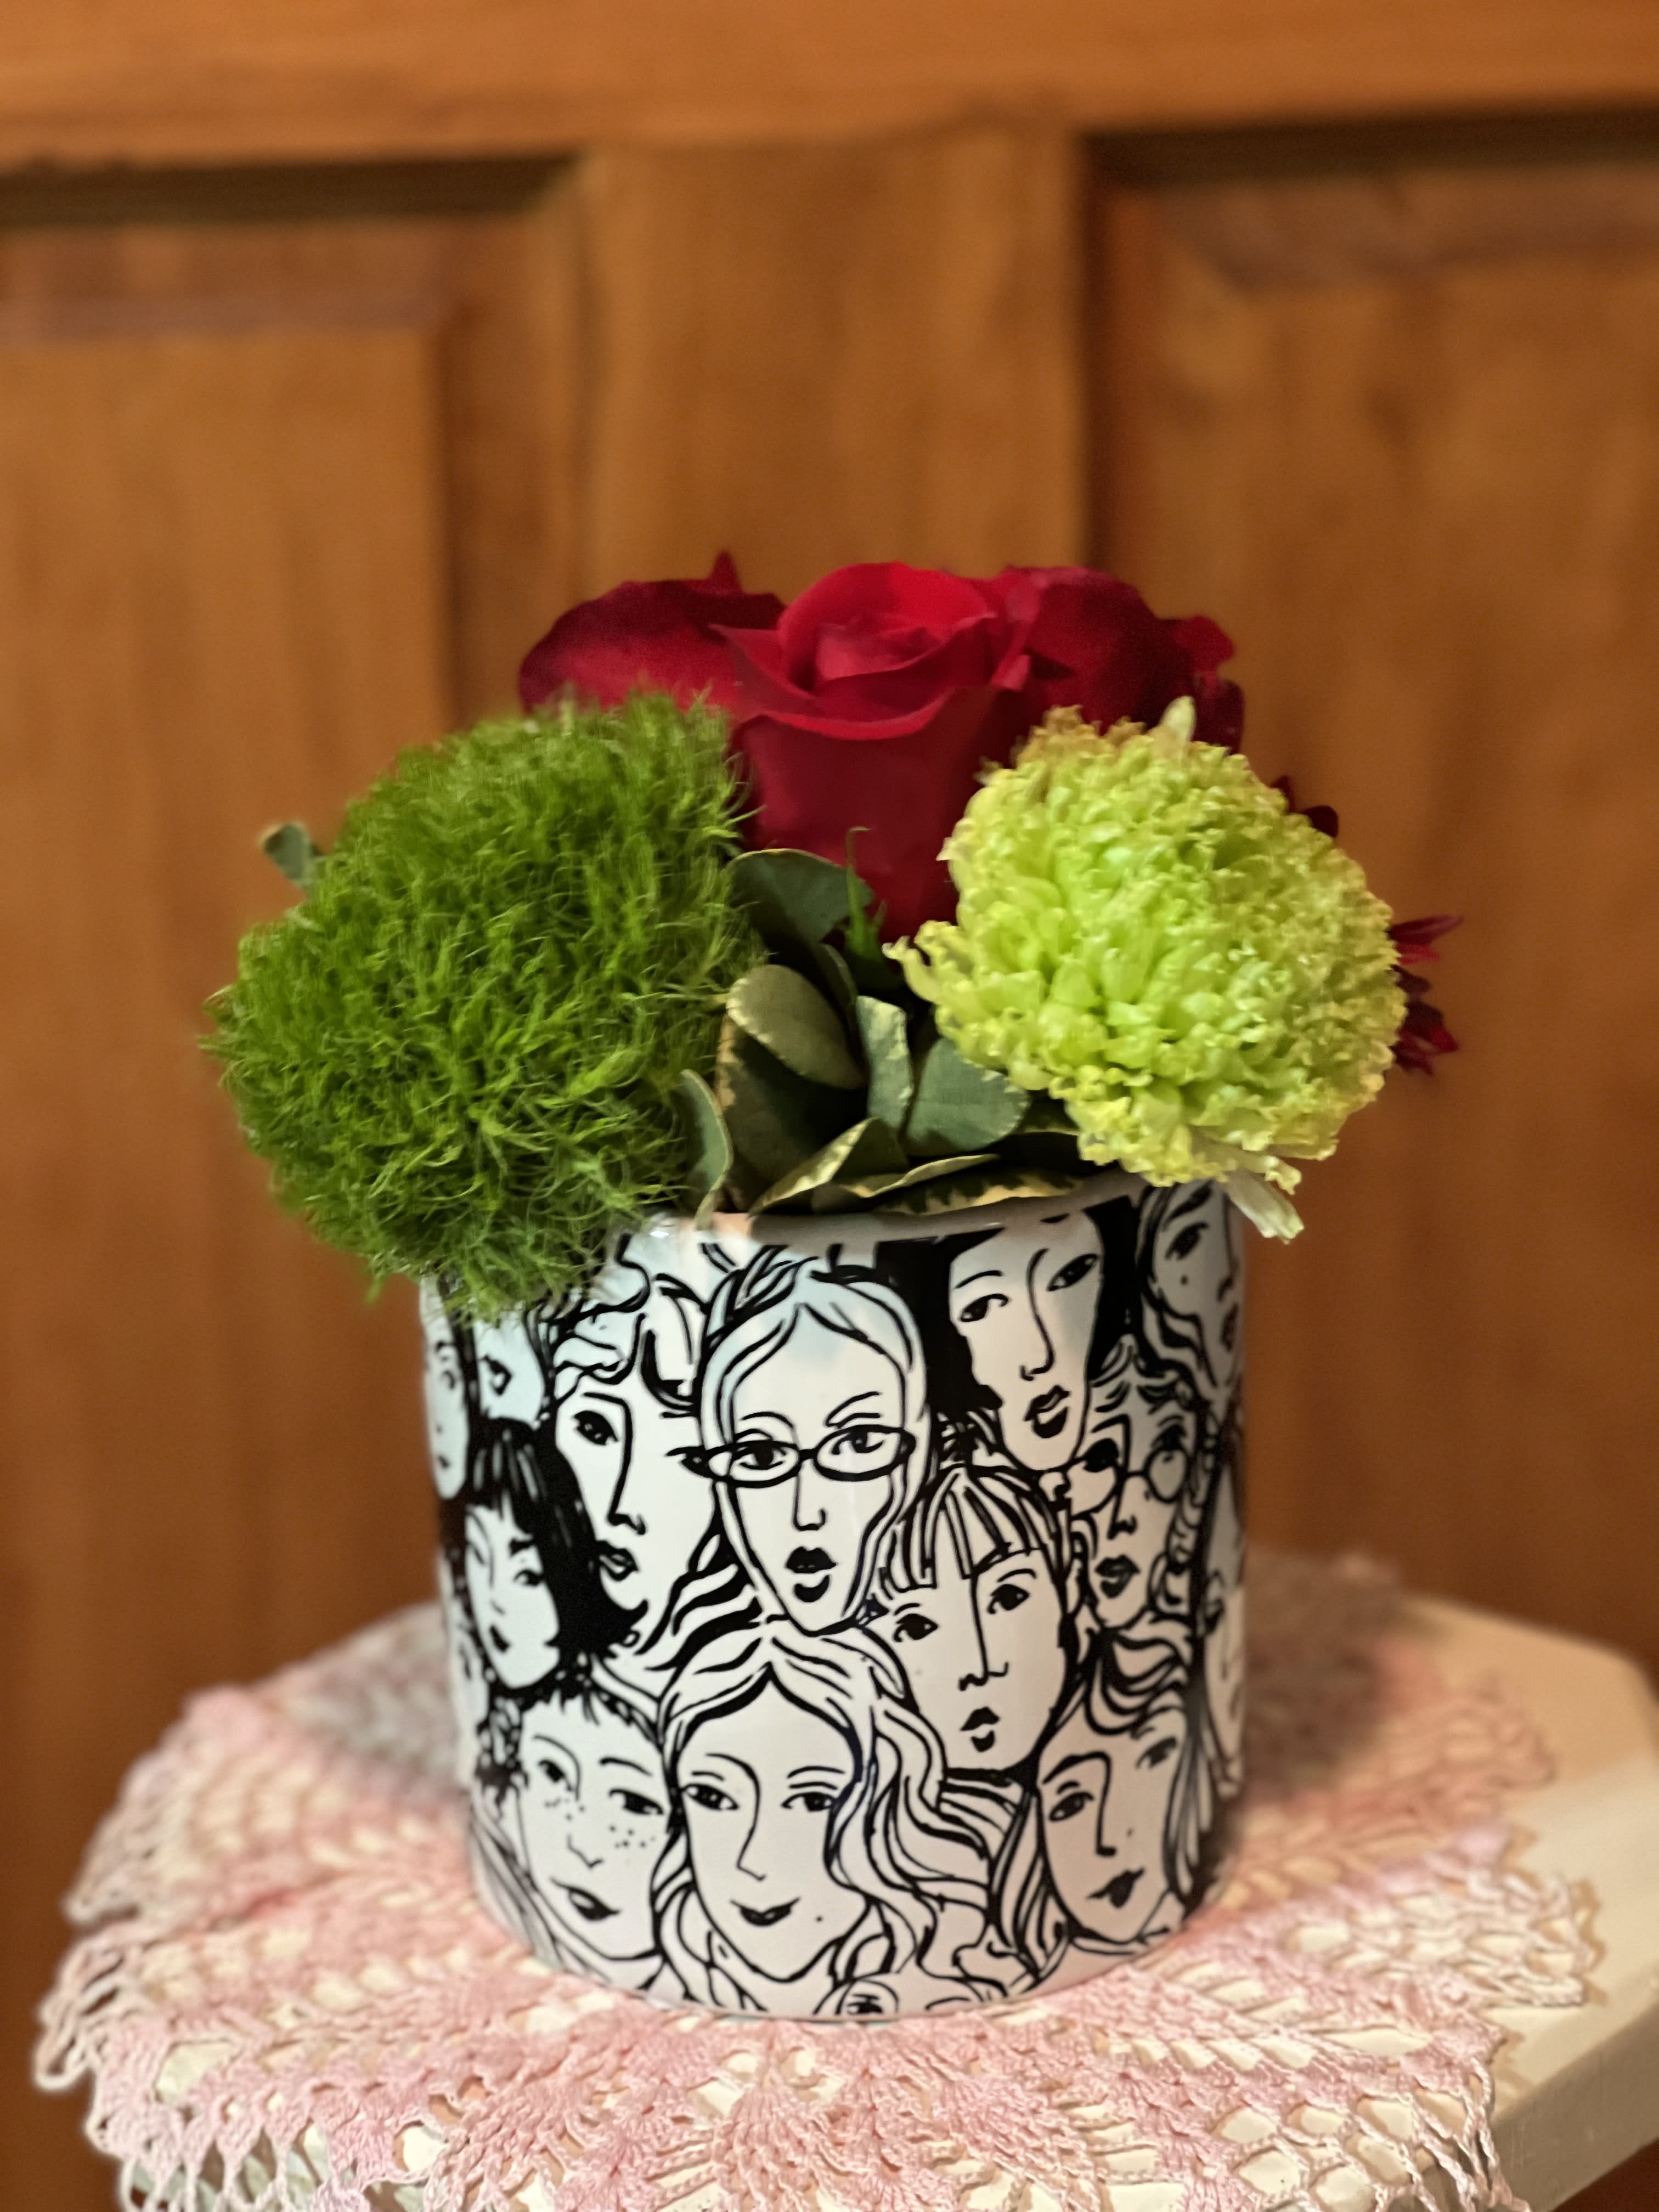 MOM -  MOM is a wonderful statement to the many faces of MOM. The faces of the women could represent the strength, diversity, and beauty of women all over the world. This round ceramic container could be seen as a tribute to the beauty and grace of women. Filled with an assortment of beautiful blooms. 